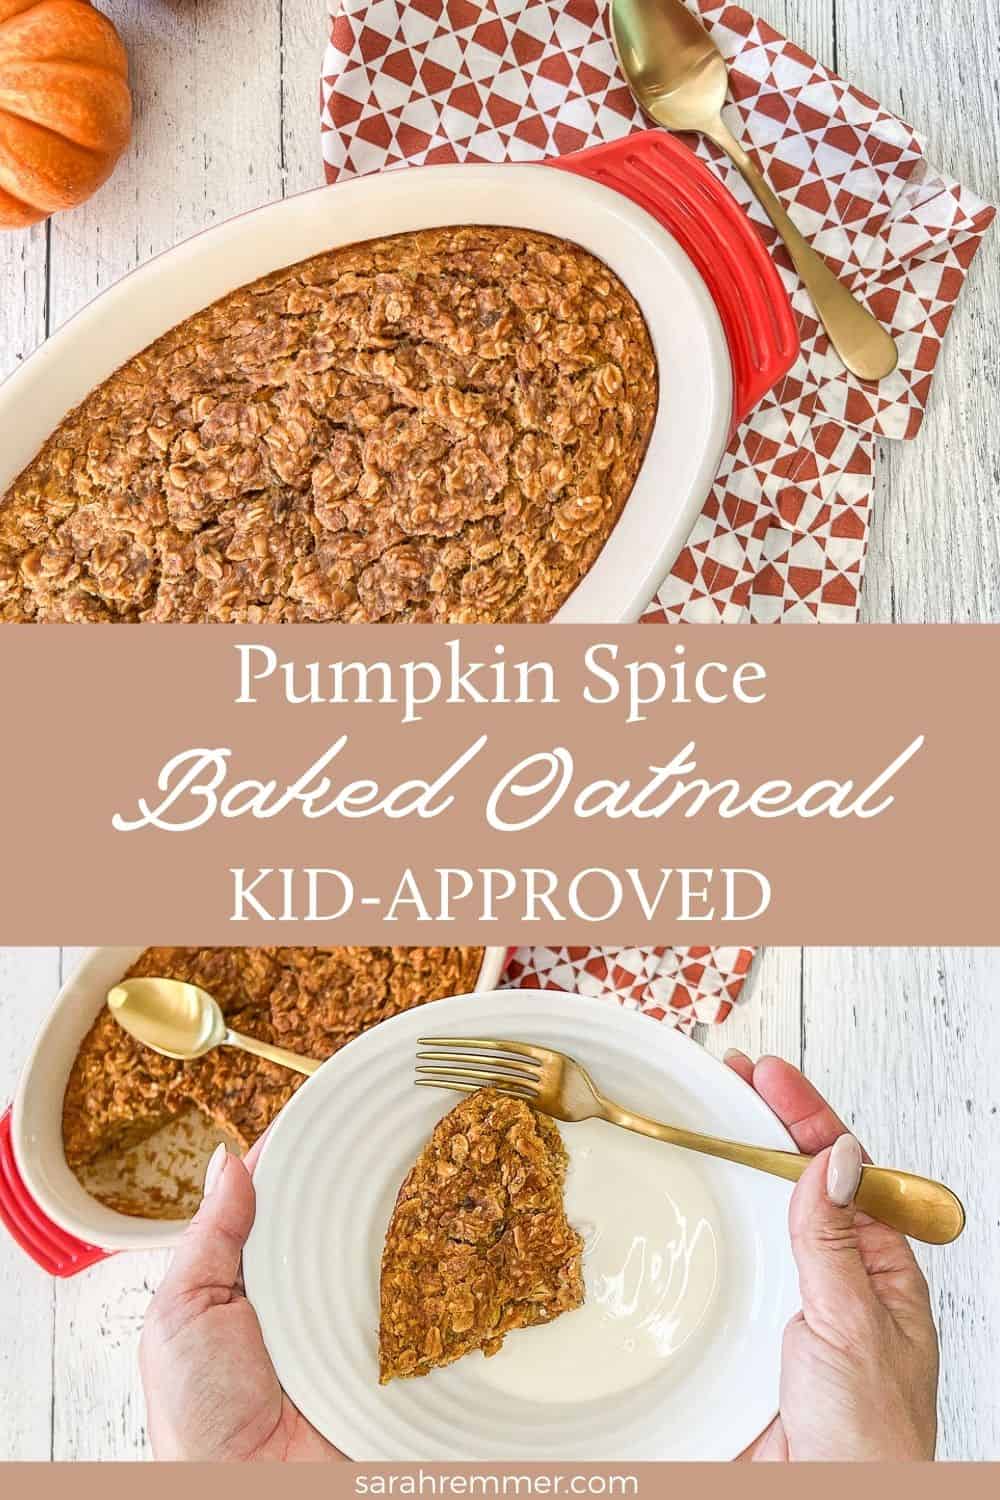 This pumpkin spice baked oatmeal is loaded with delicious Fall flavours, as well as nutrition. It’s rich in protein, fibre, vitamins and minerals and will keep your family satisfied all morning.